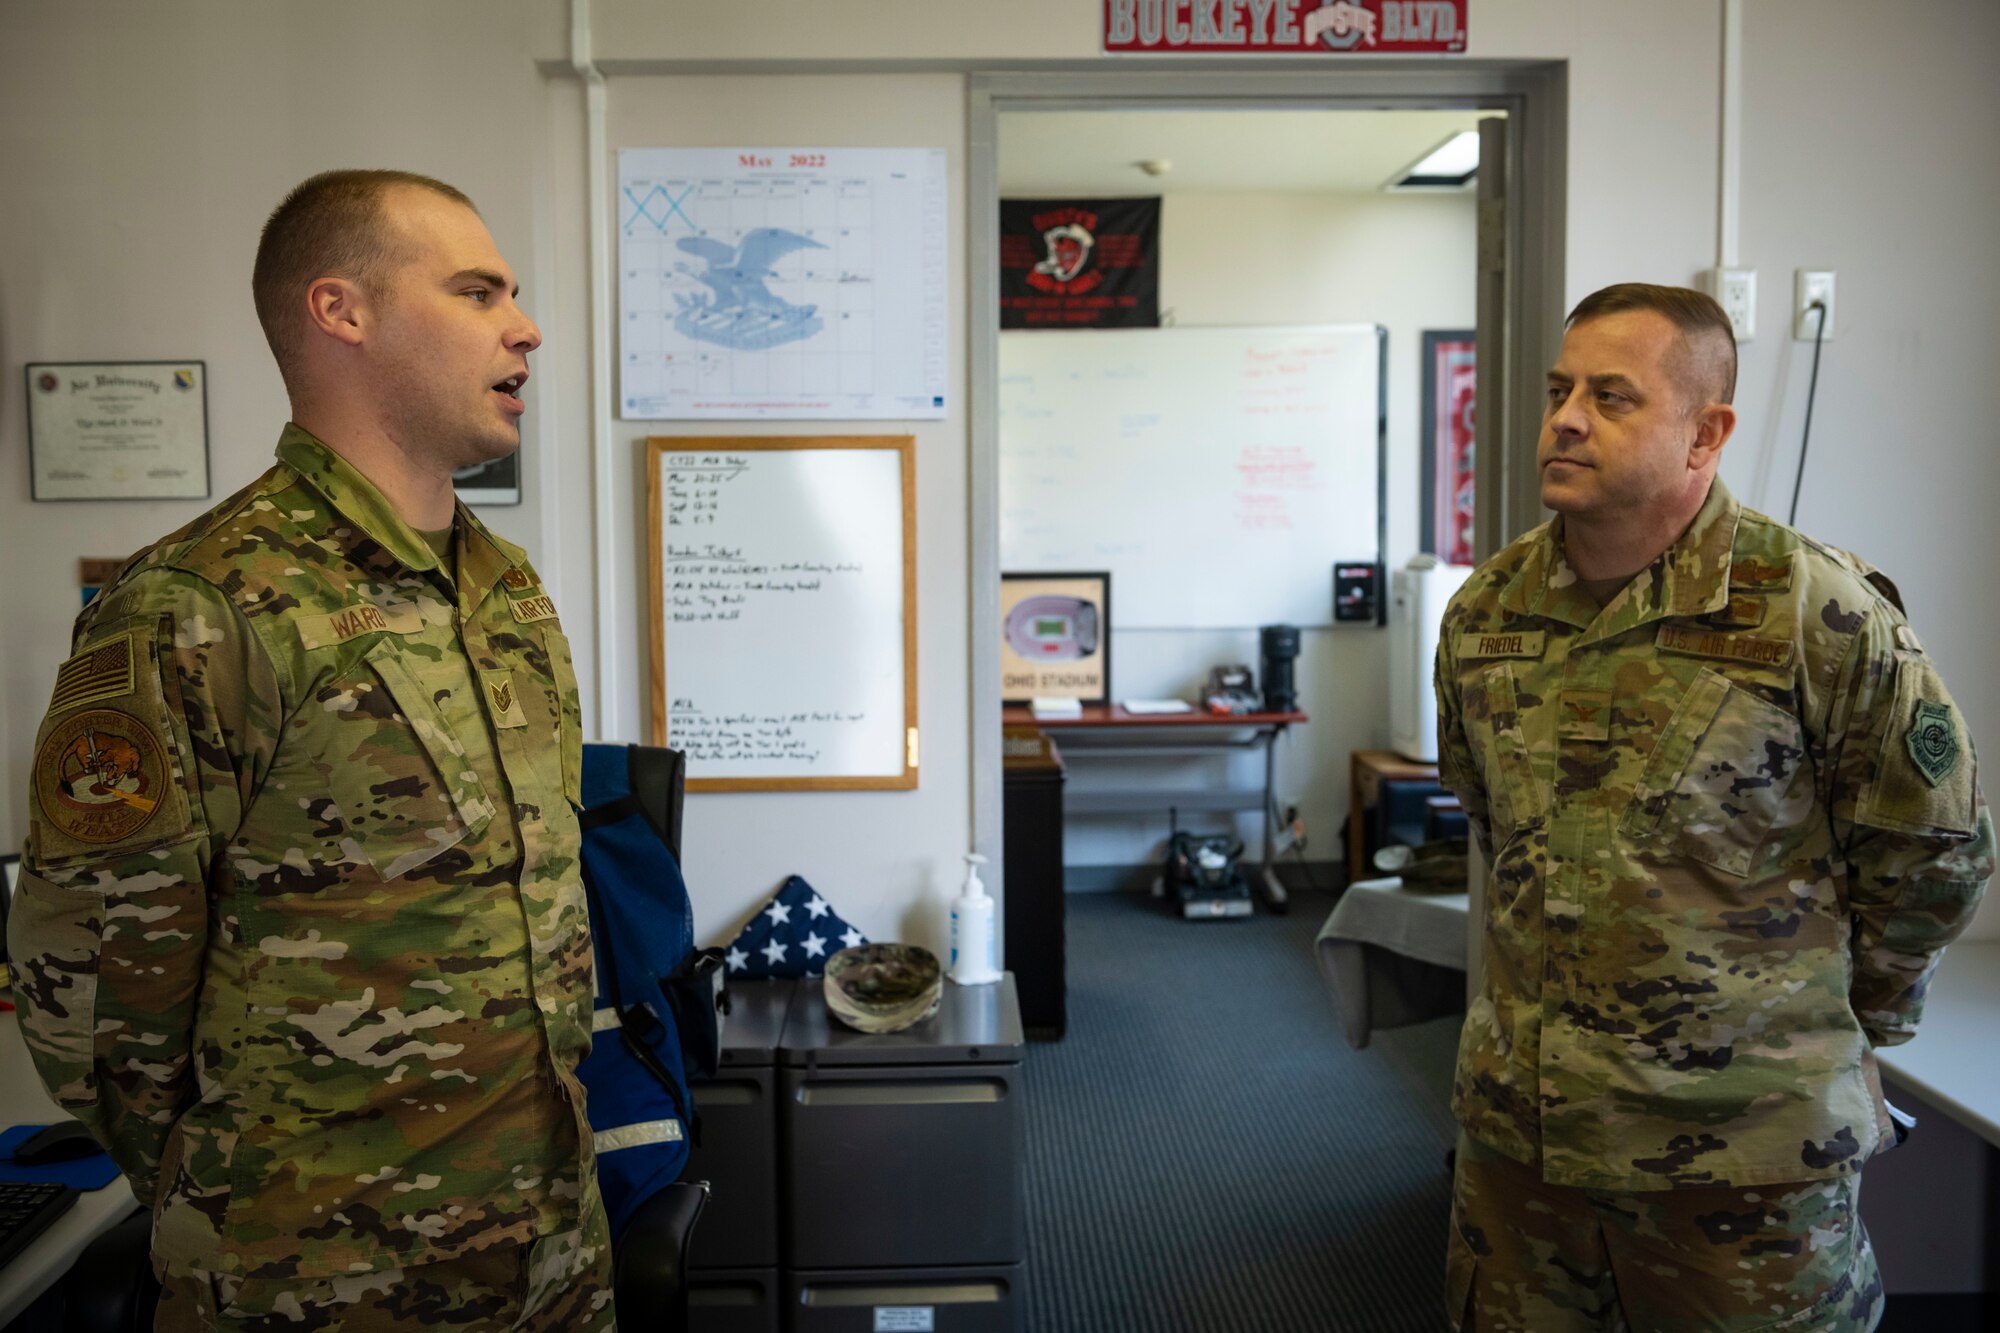 Military members in uniform talk to each other